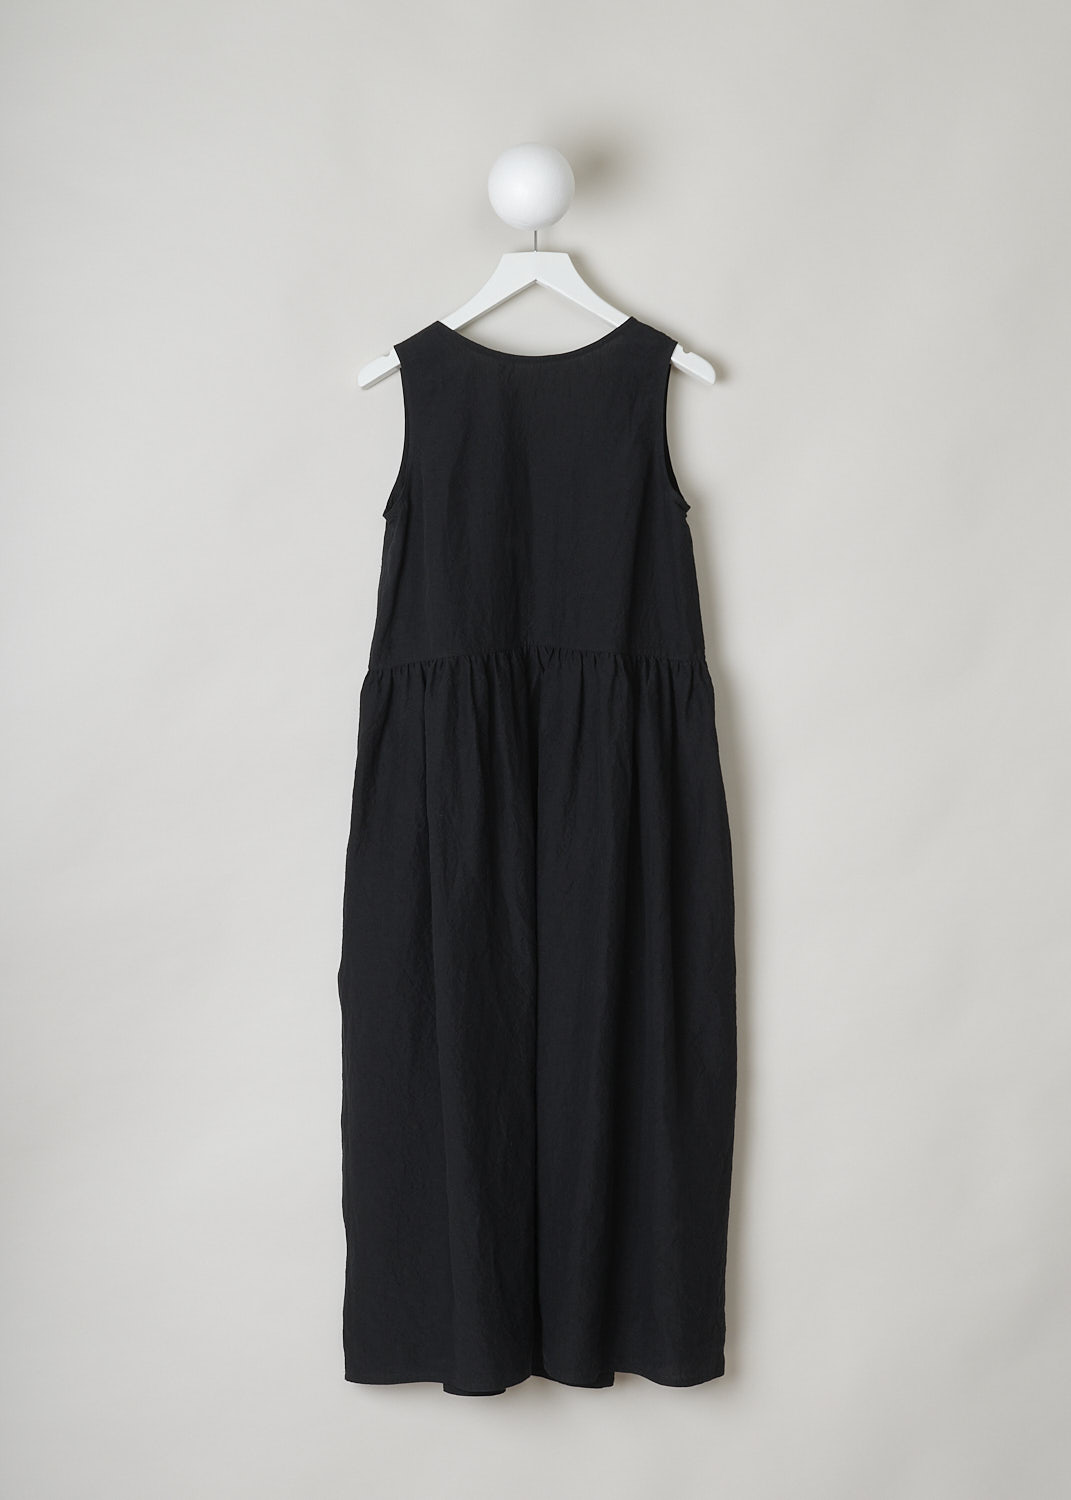 SOFIE Dâ€™HOORE, BLACK LINEN DANDLE DRESS, DANDLE_LIFE_BLACK, Black, Back, This black sleeveless dress has U-neckline. The dress has a wide A-line silhouette. A straight crystal pleated hemline separates the bodice from the midi length skirt. Concealed slanted pockets can be found in the side seam. 
